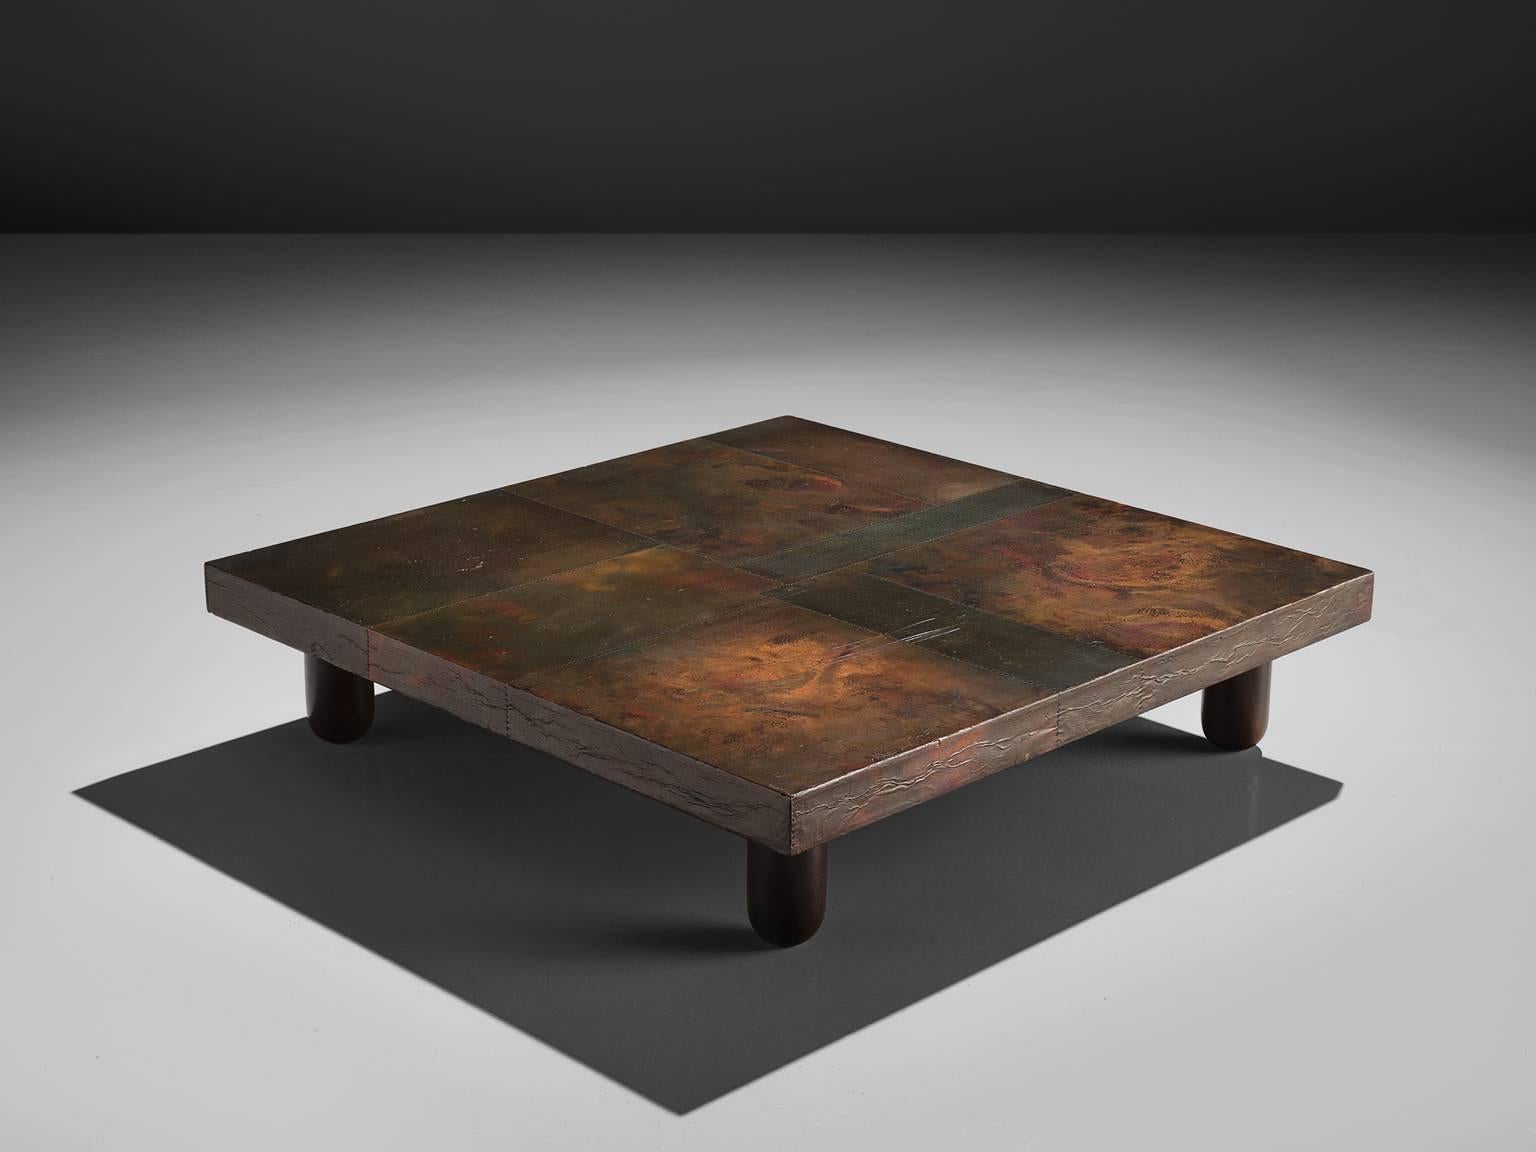 Coffee or cocktail table, copper and wood, 1960s, Italy.

This coffee table is an eyecatcher. The copper is in beautiful, patinated condition and the vibrant yet natural rust or earth-like color is something out of this world. Lorenzo Bruchiellaro